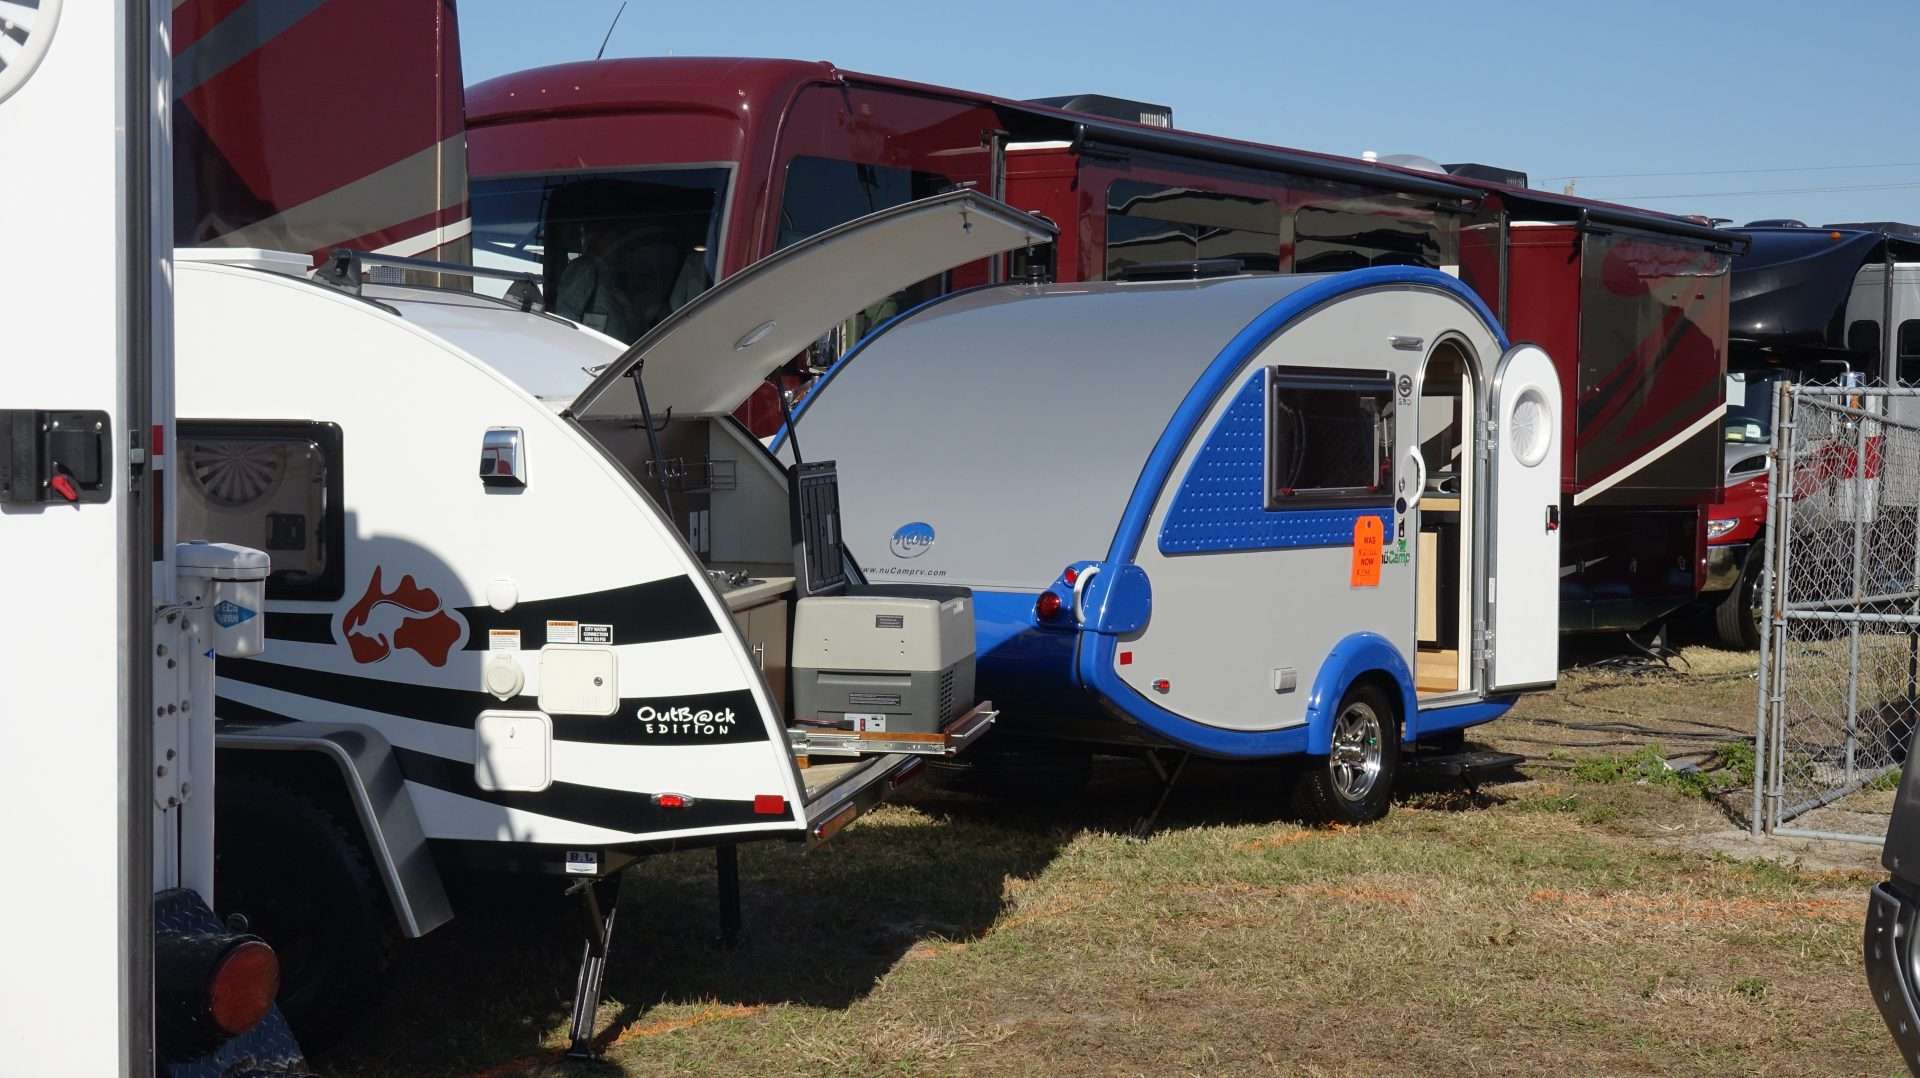 New RV campers parked on a sales lot at RV show